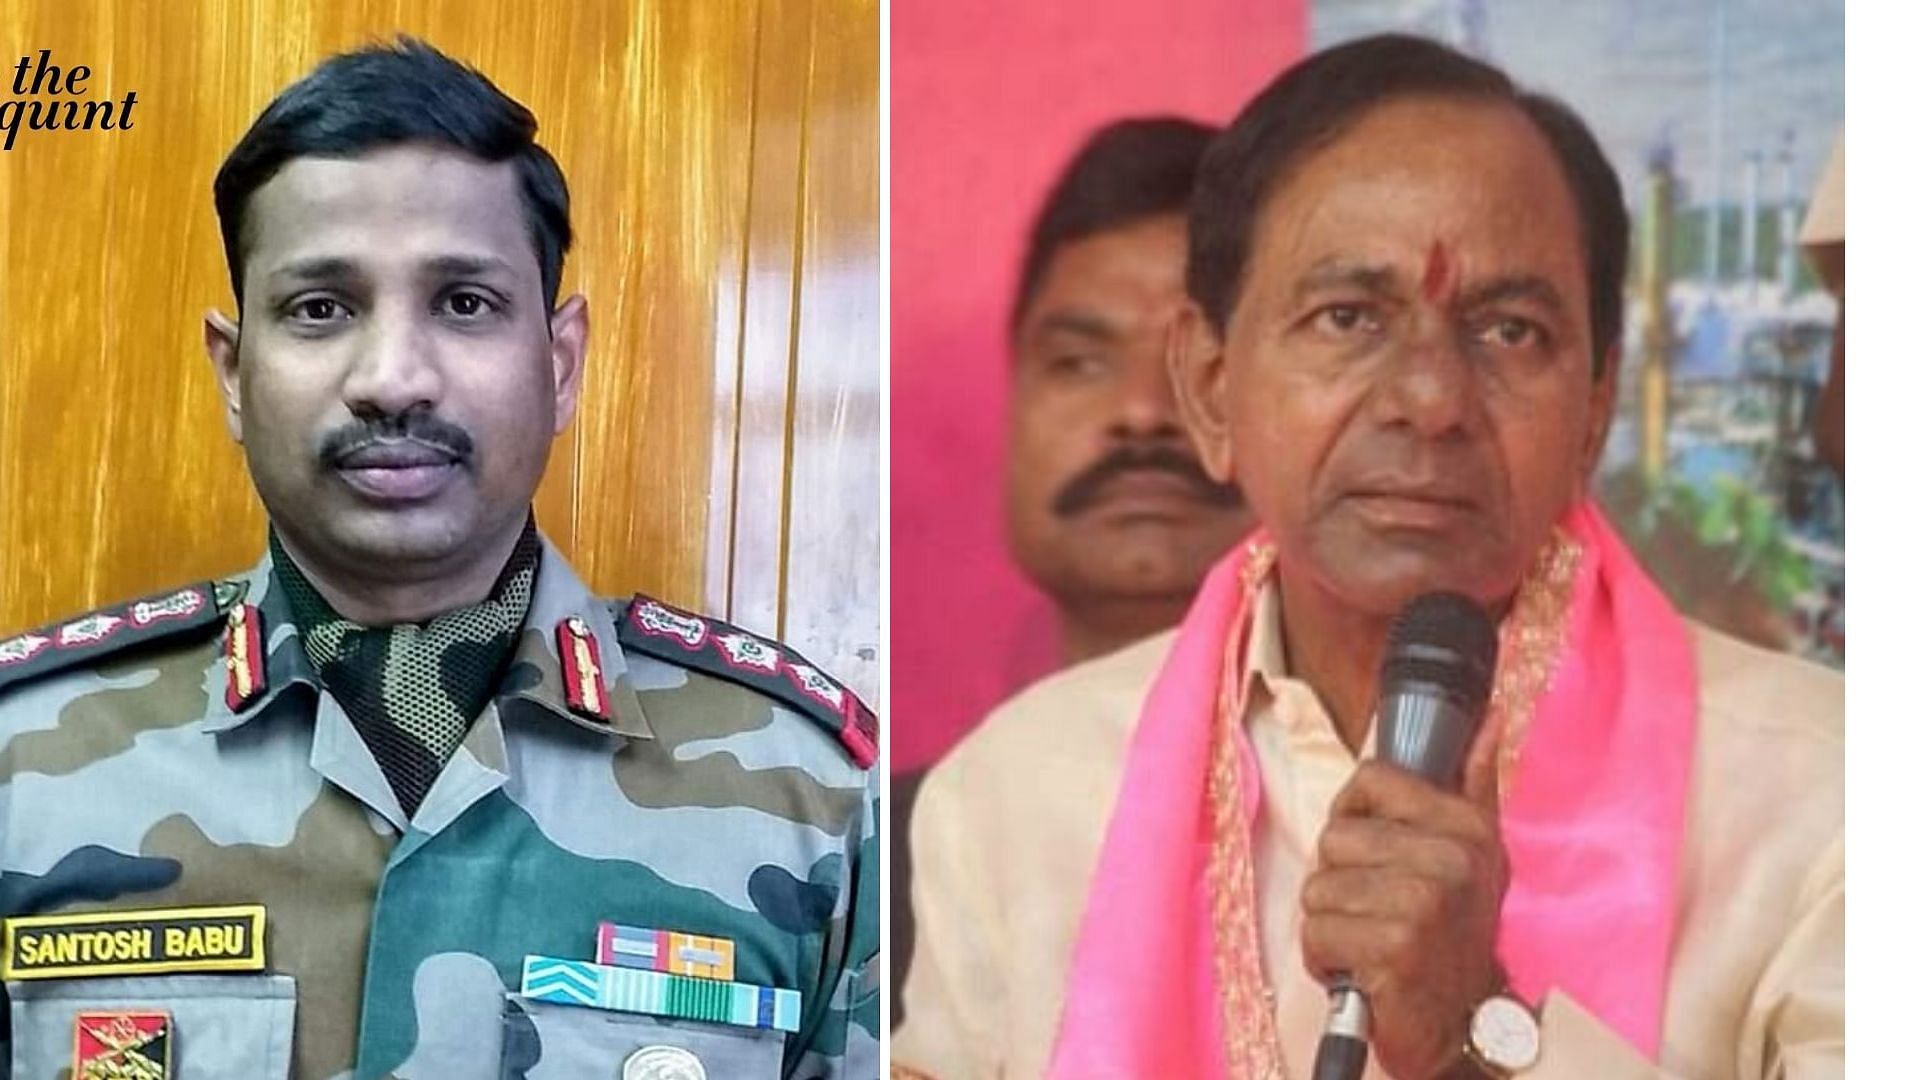 Telangana Chief Minister K Chandrasekhar Rao on Friday, 22 June, announced that the state government will provide Rs 5 crore cash and a plot of land to the family of late Colonel Santosh Babu.